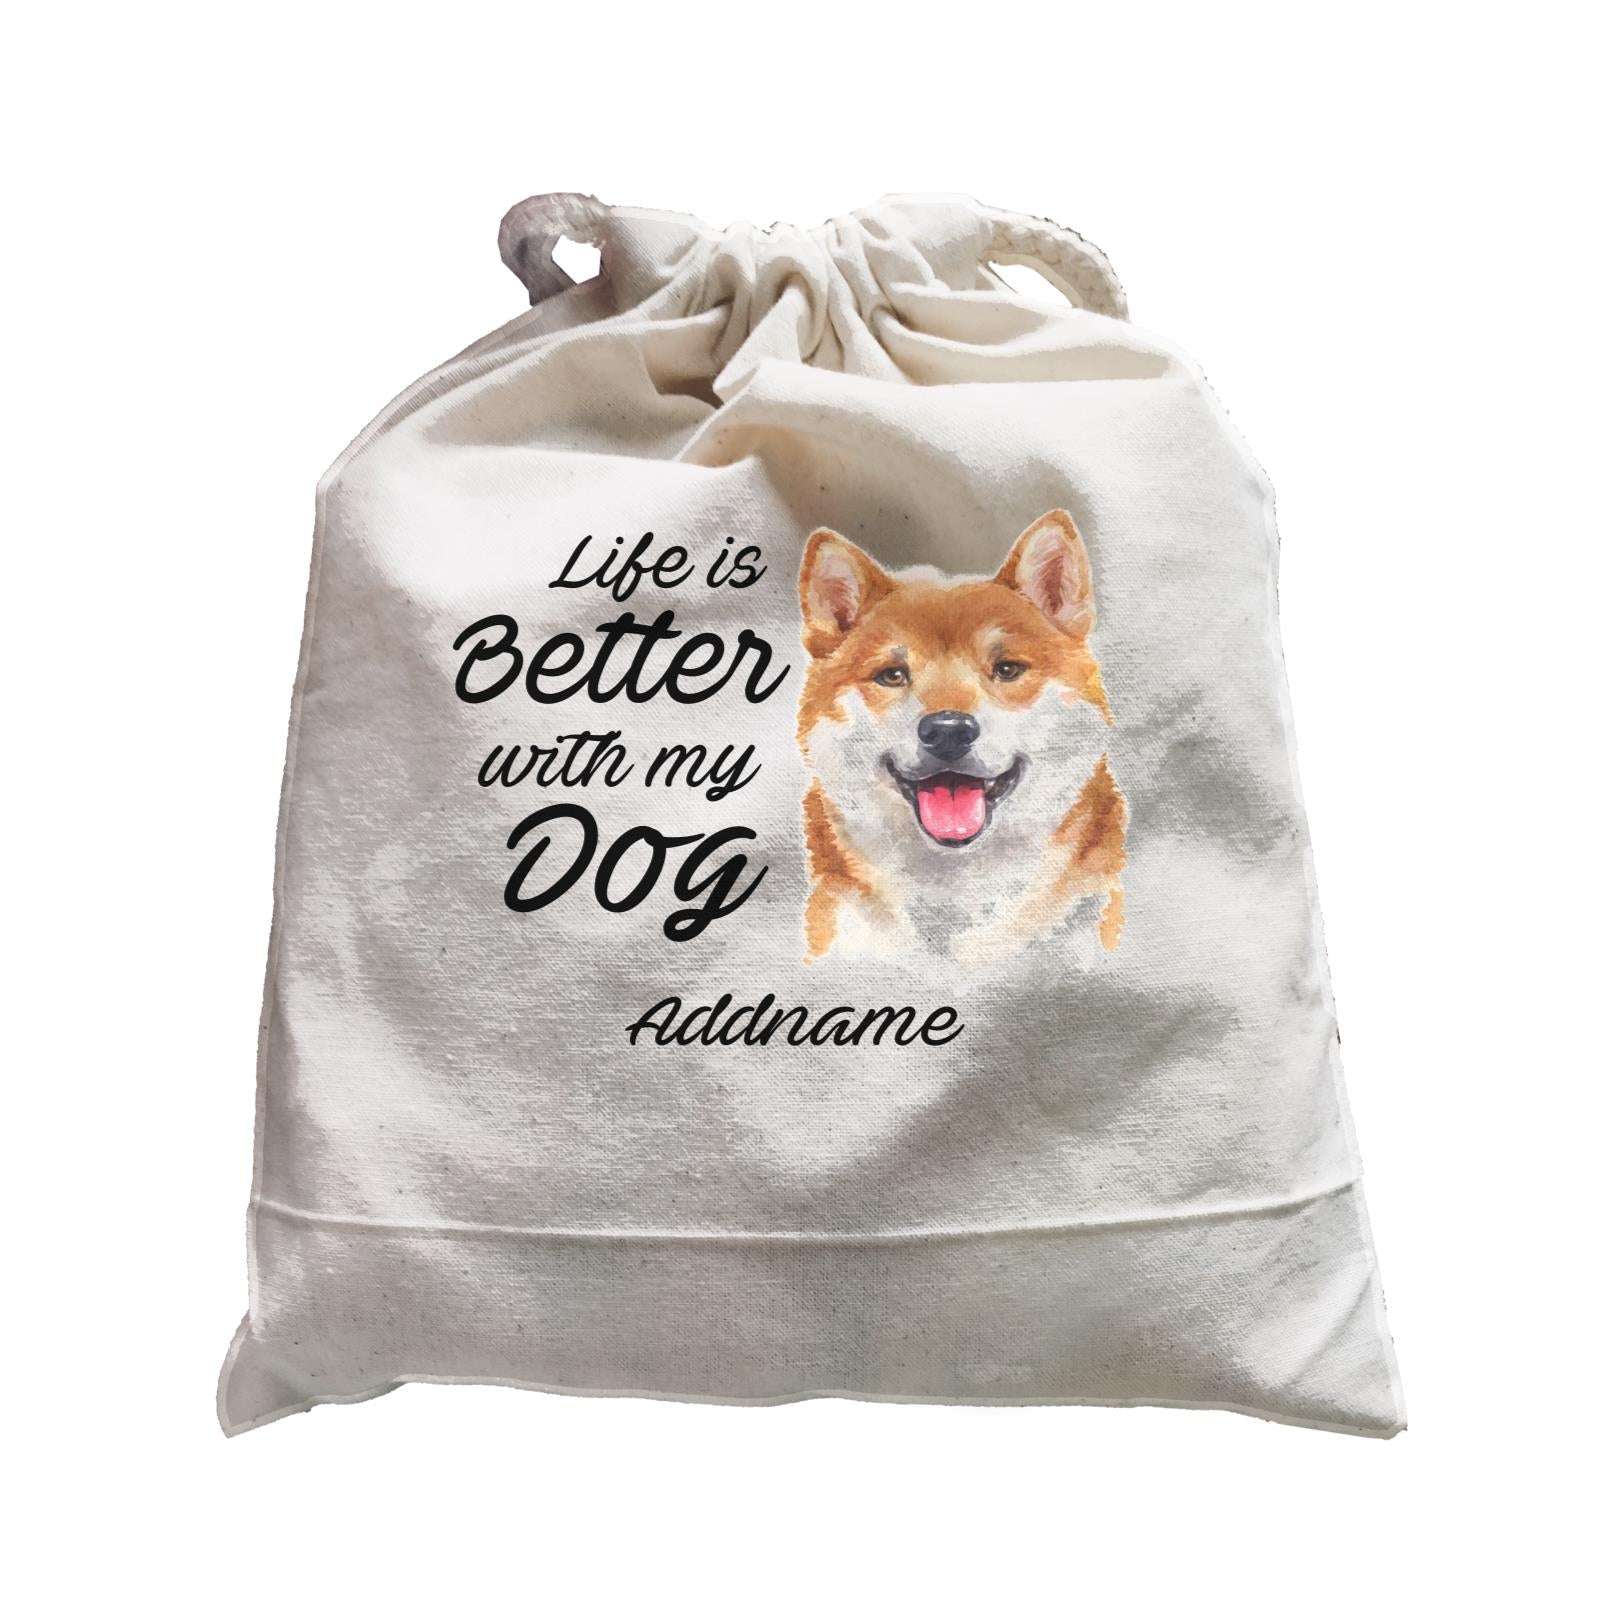 Watercolor Life is Better With My Dog Shiba Inu Addname Satchel